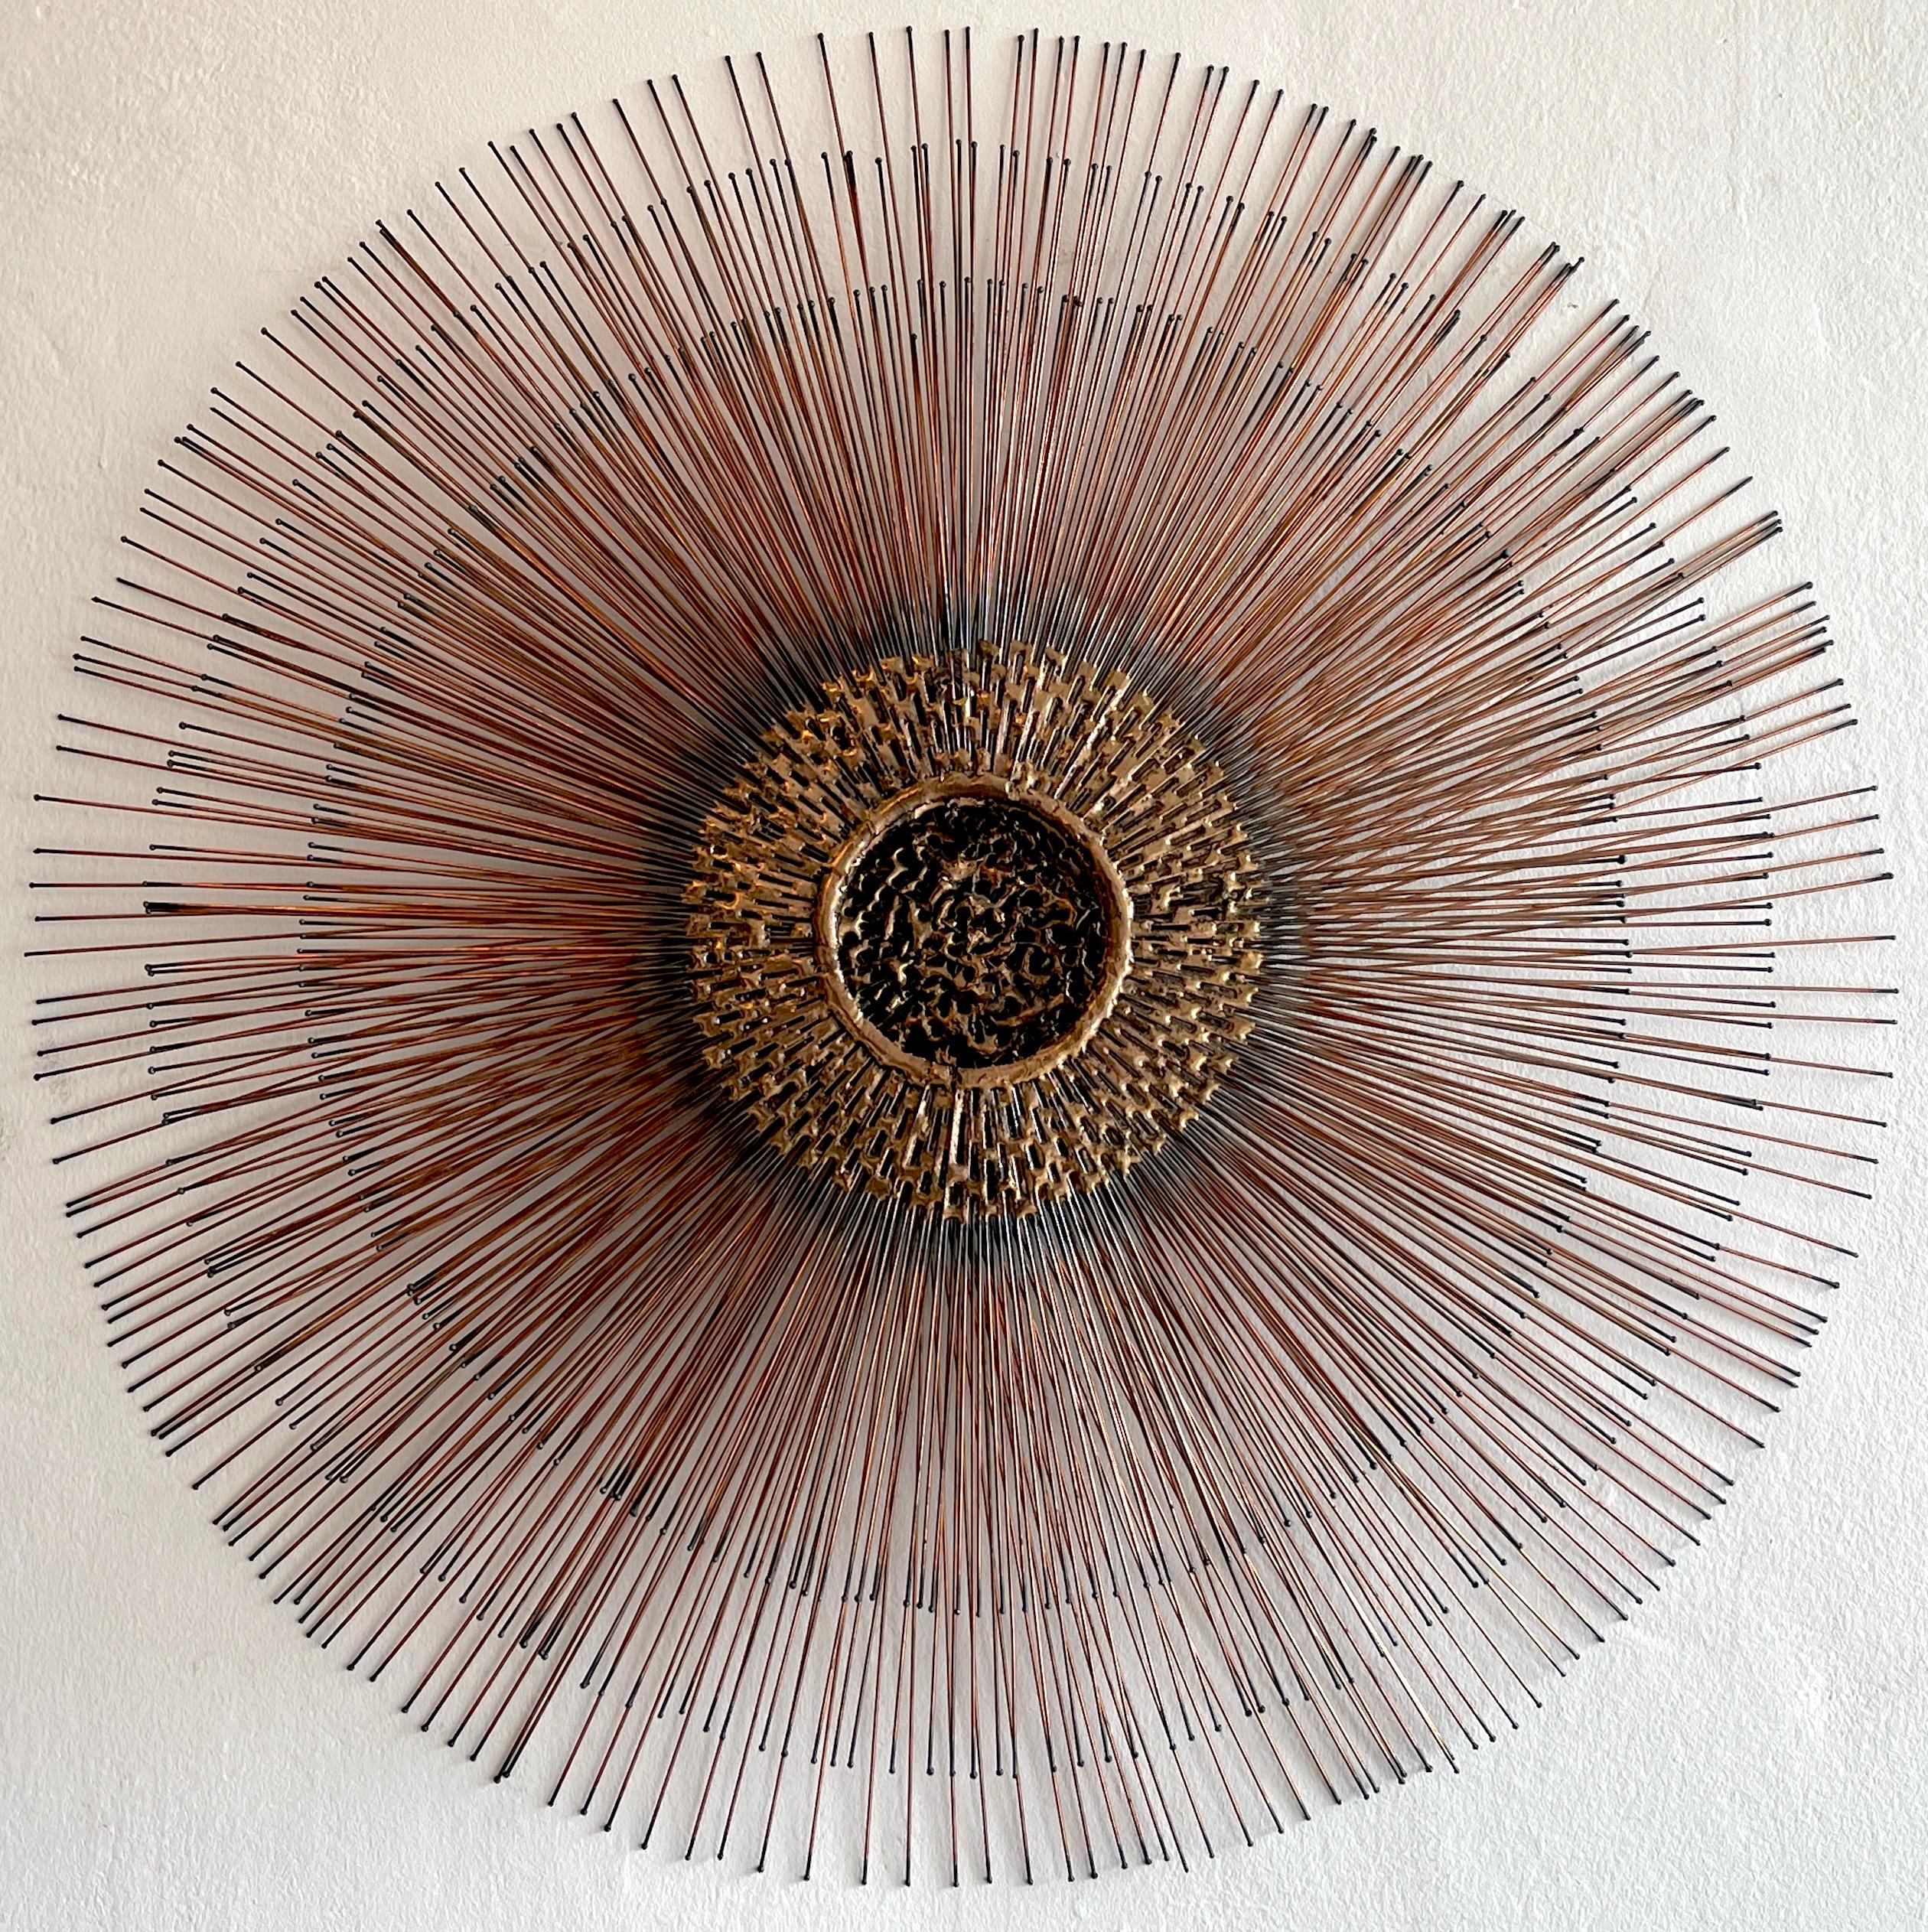 Bruce and William Friedle metal five-tier sunburst, of typical form with hundreds of long, thin copper rods with blackened tips resembling burnt matchsticks radiate with molten 4